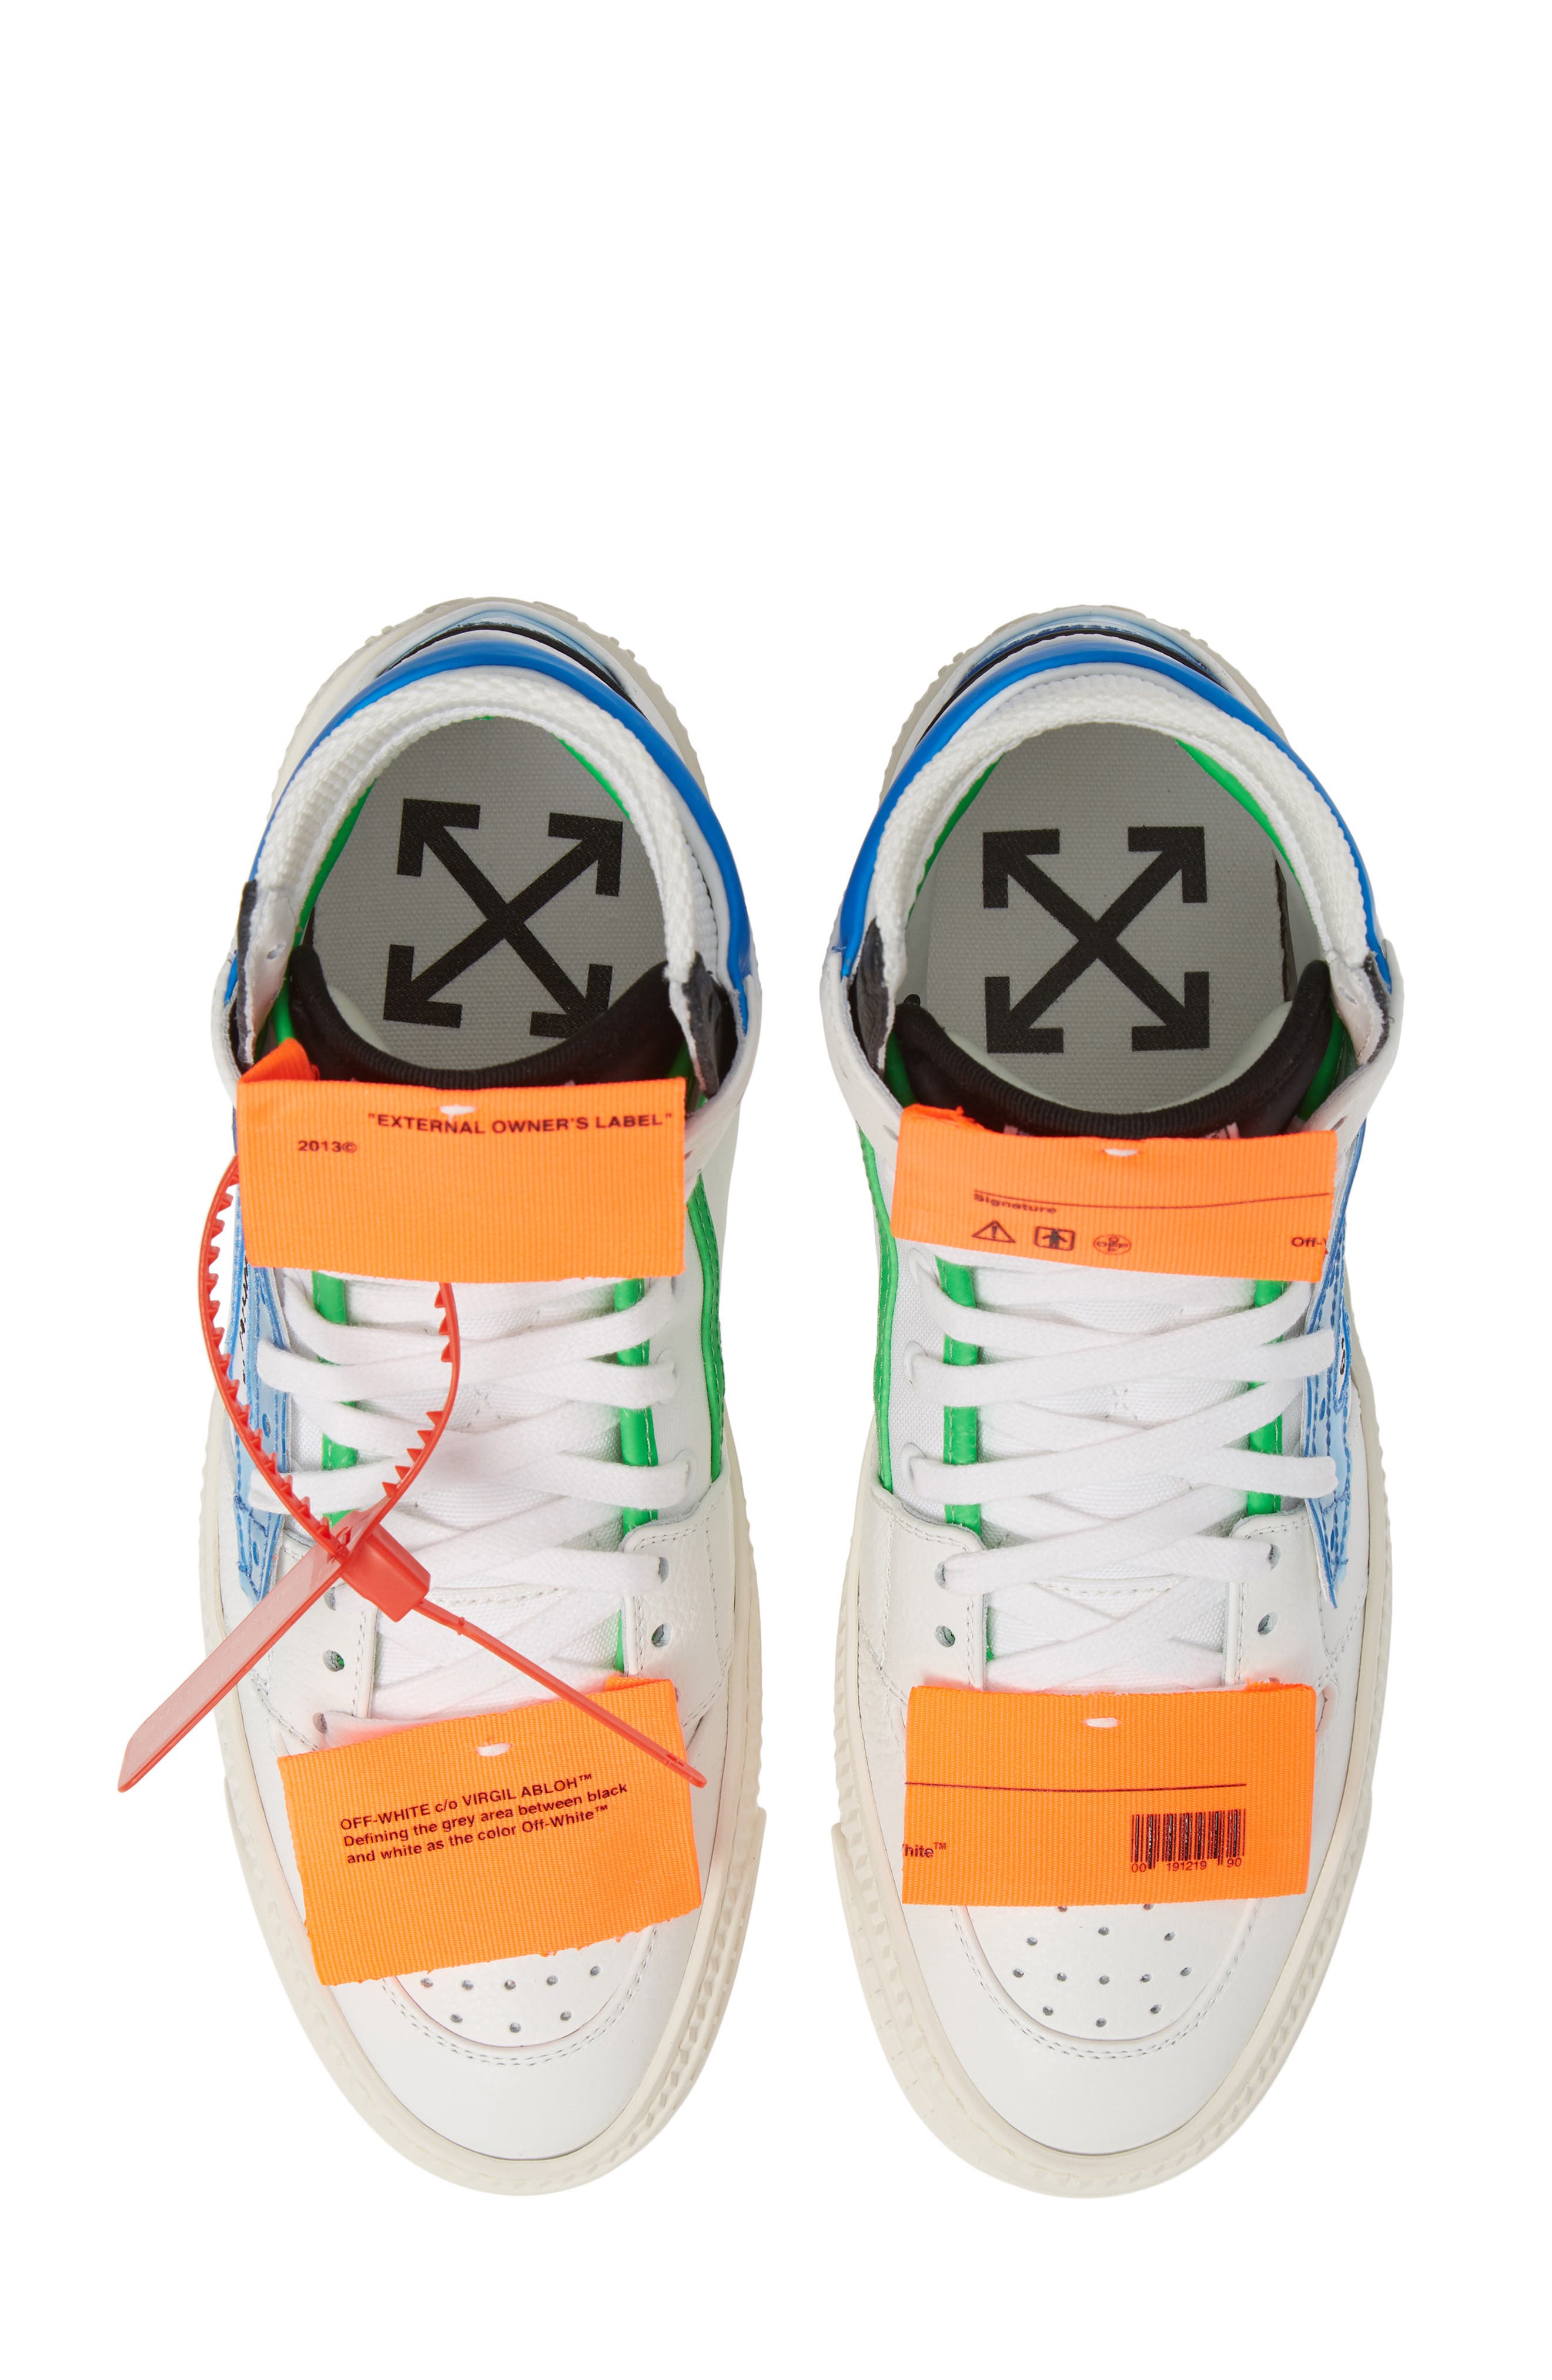 off white sneakers nordstrom